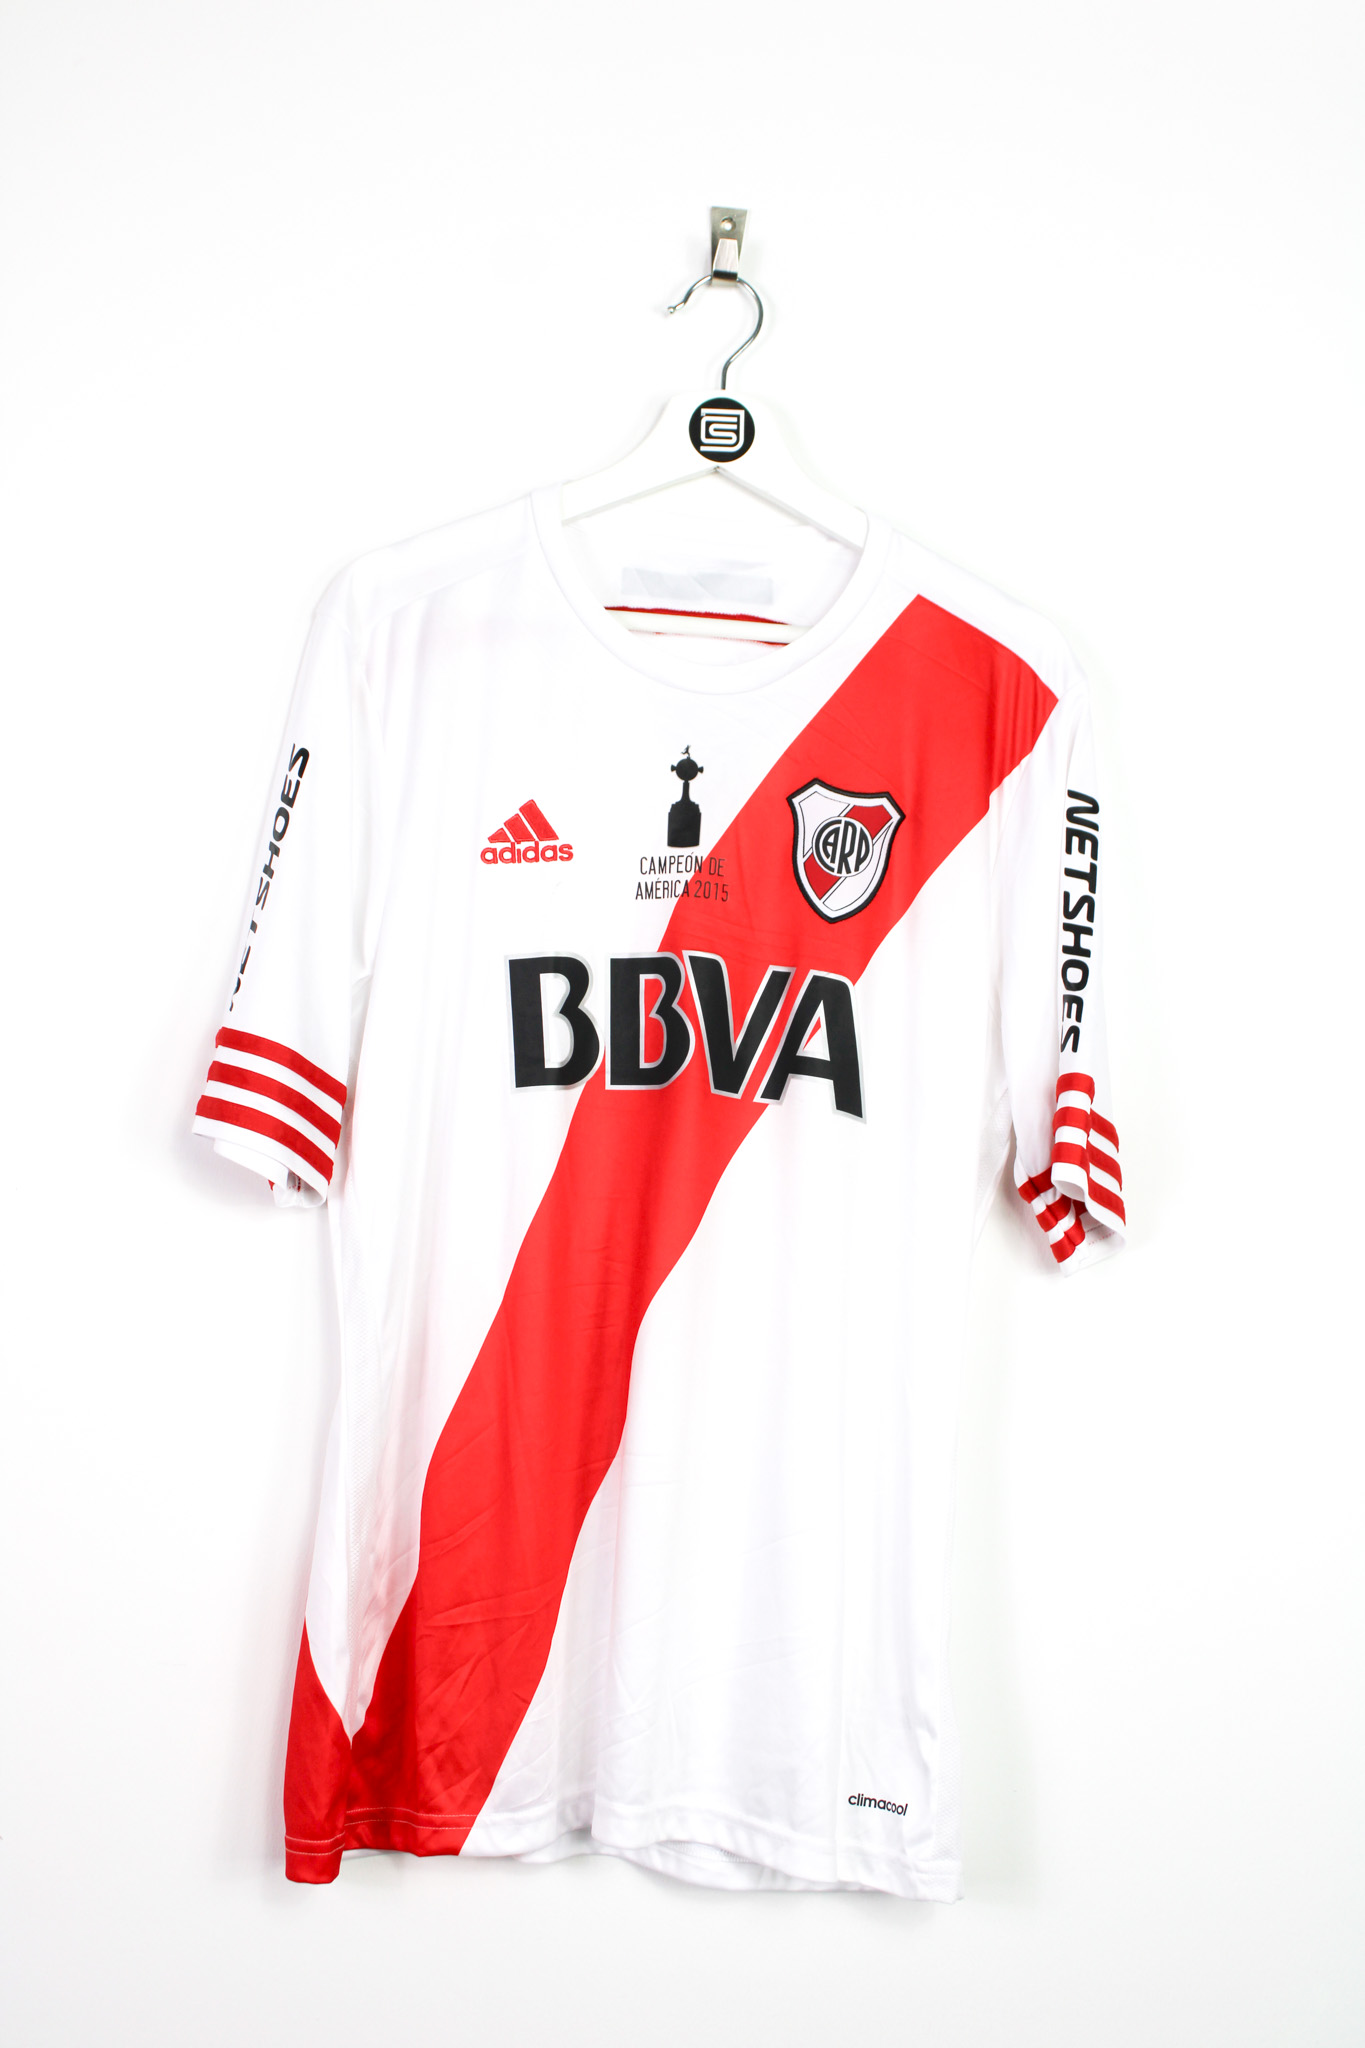 adidas Originals Launches River Plate Retro Collection - FOOTBALL